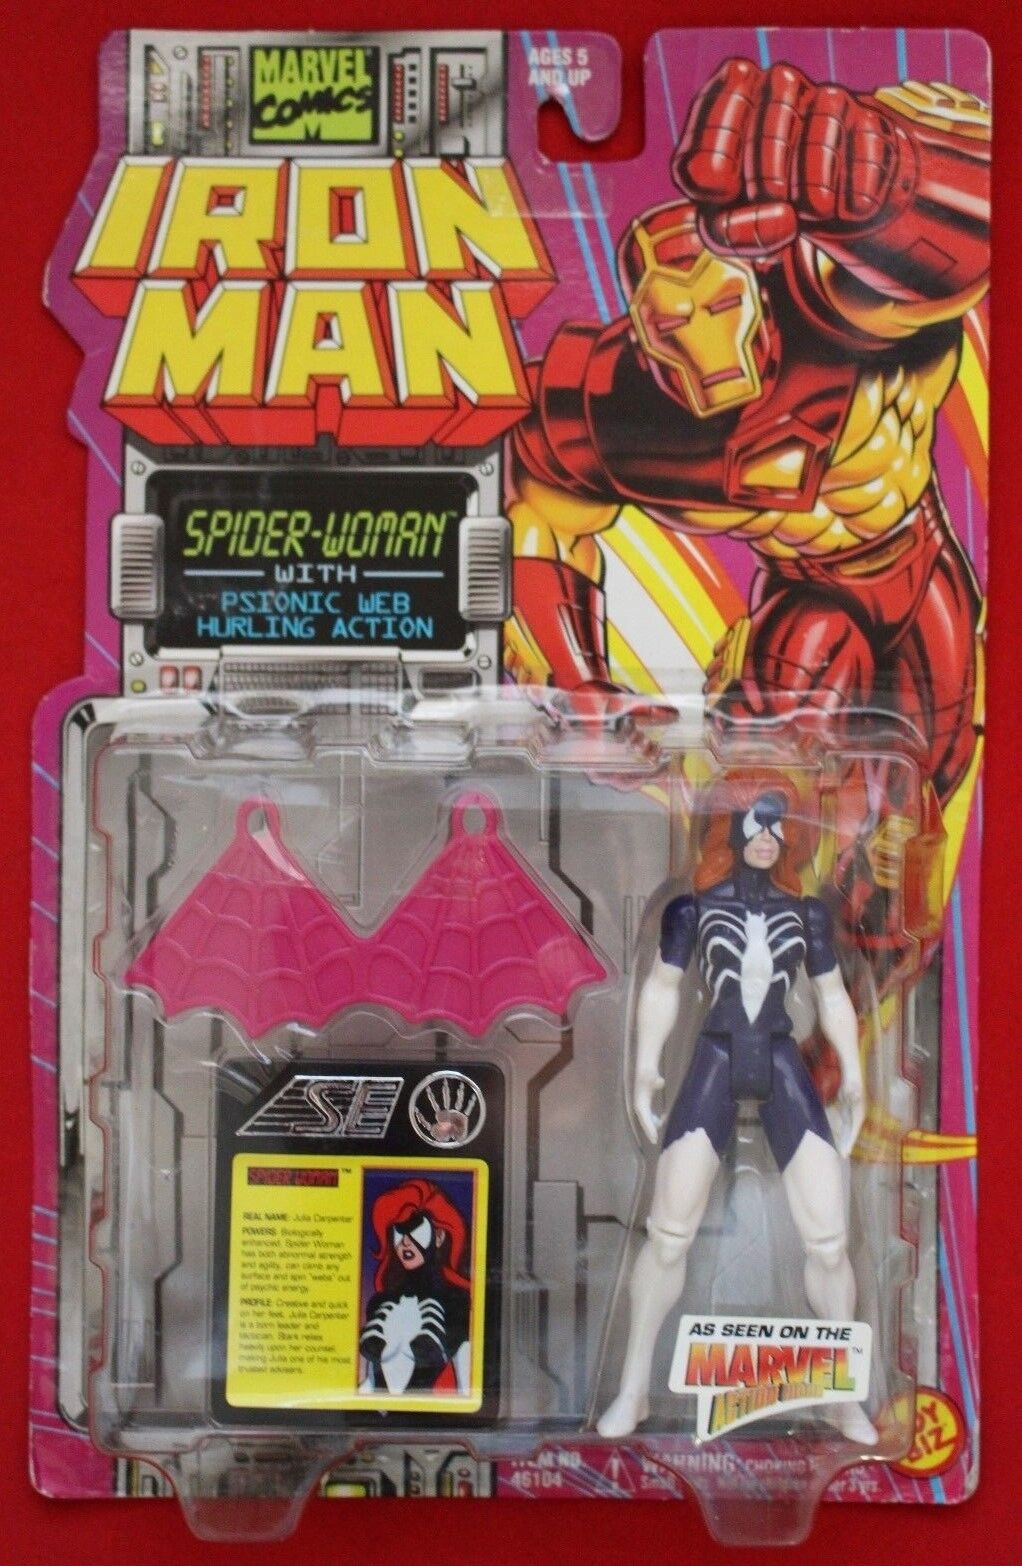 Iron Man Spider-Woman with Psionic Webs Action Figure